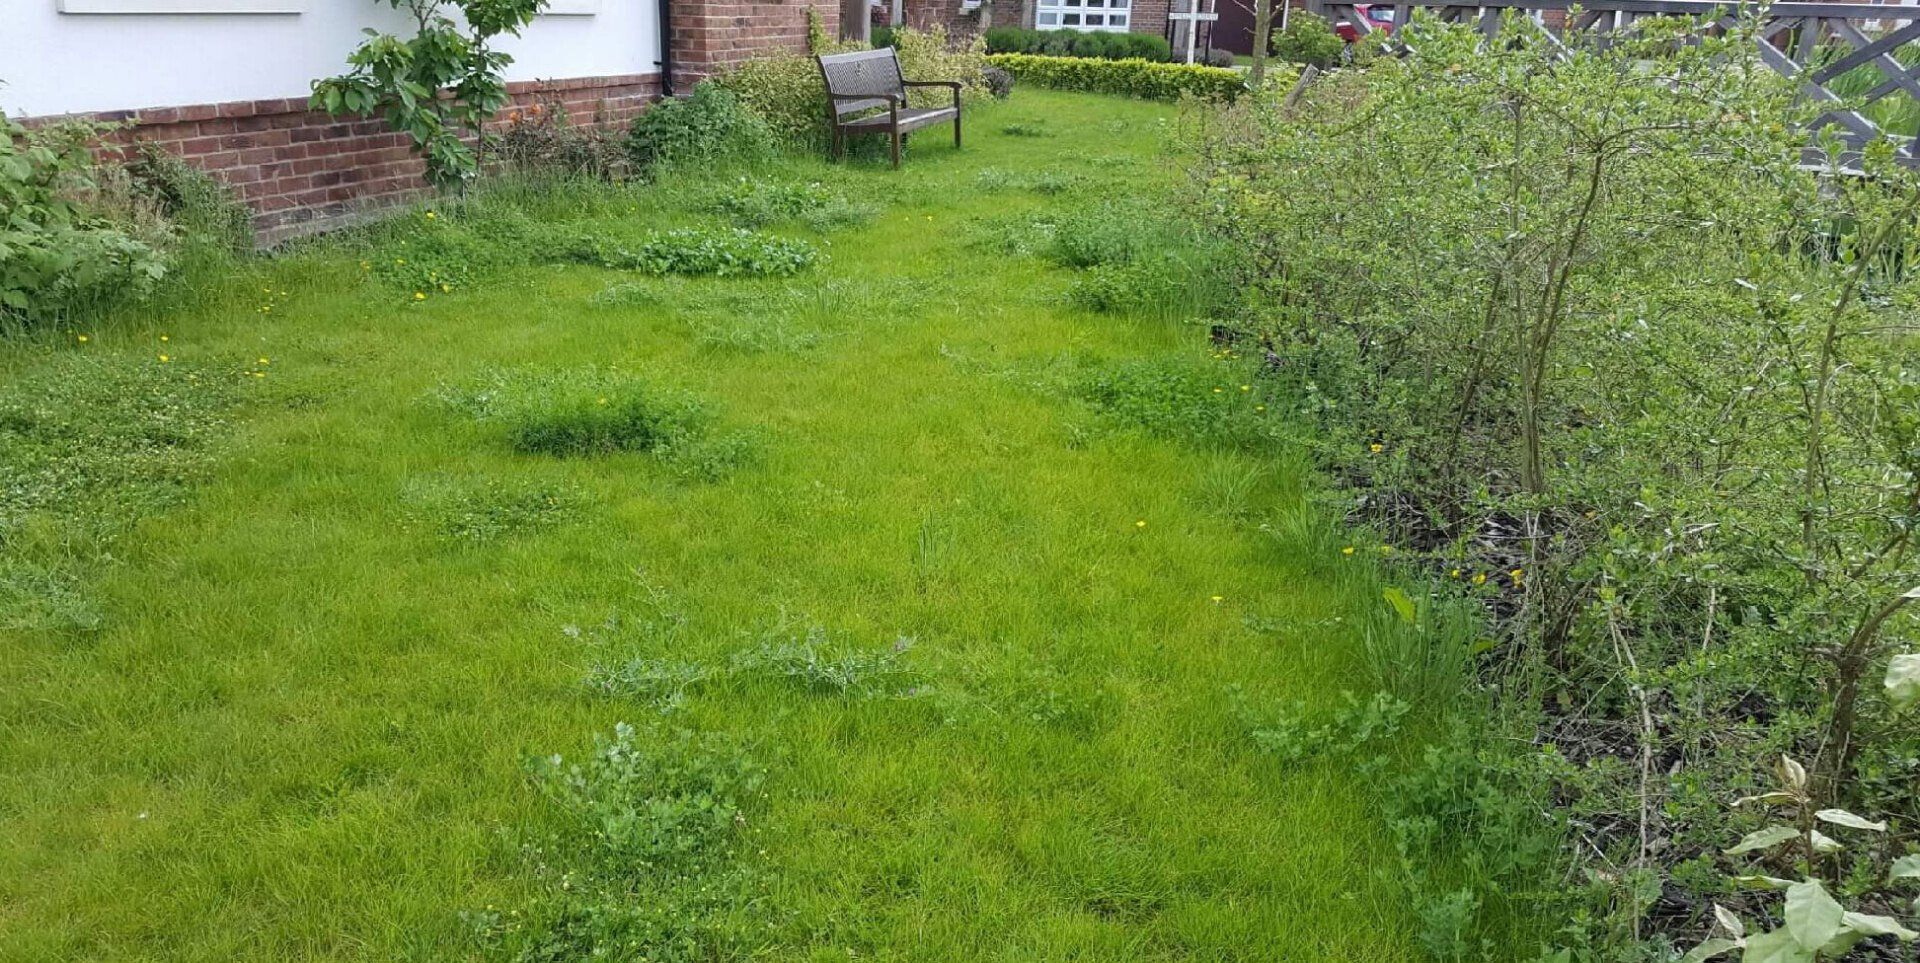 Before: overgrown lawn full of weeds